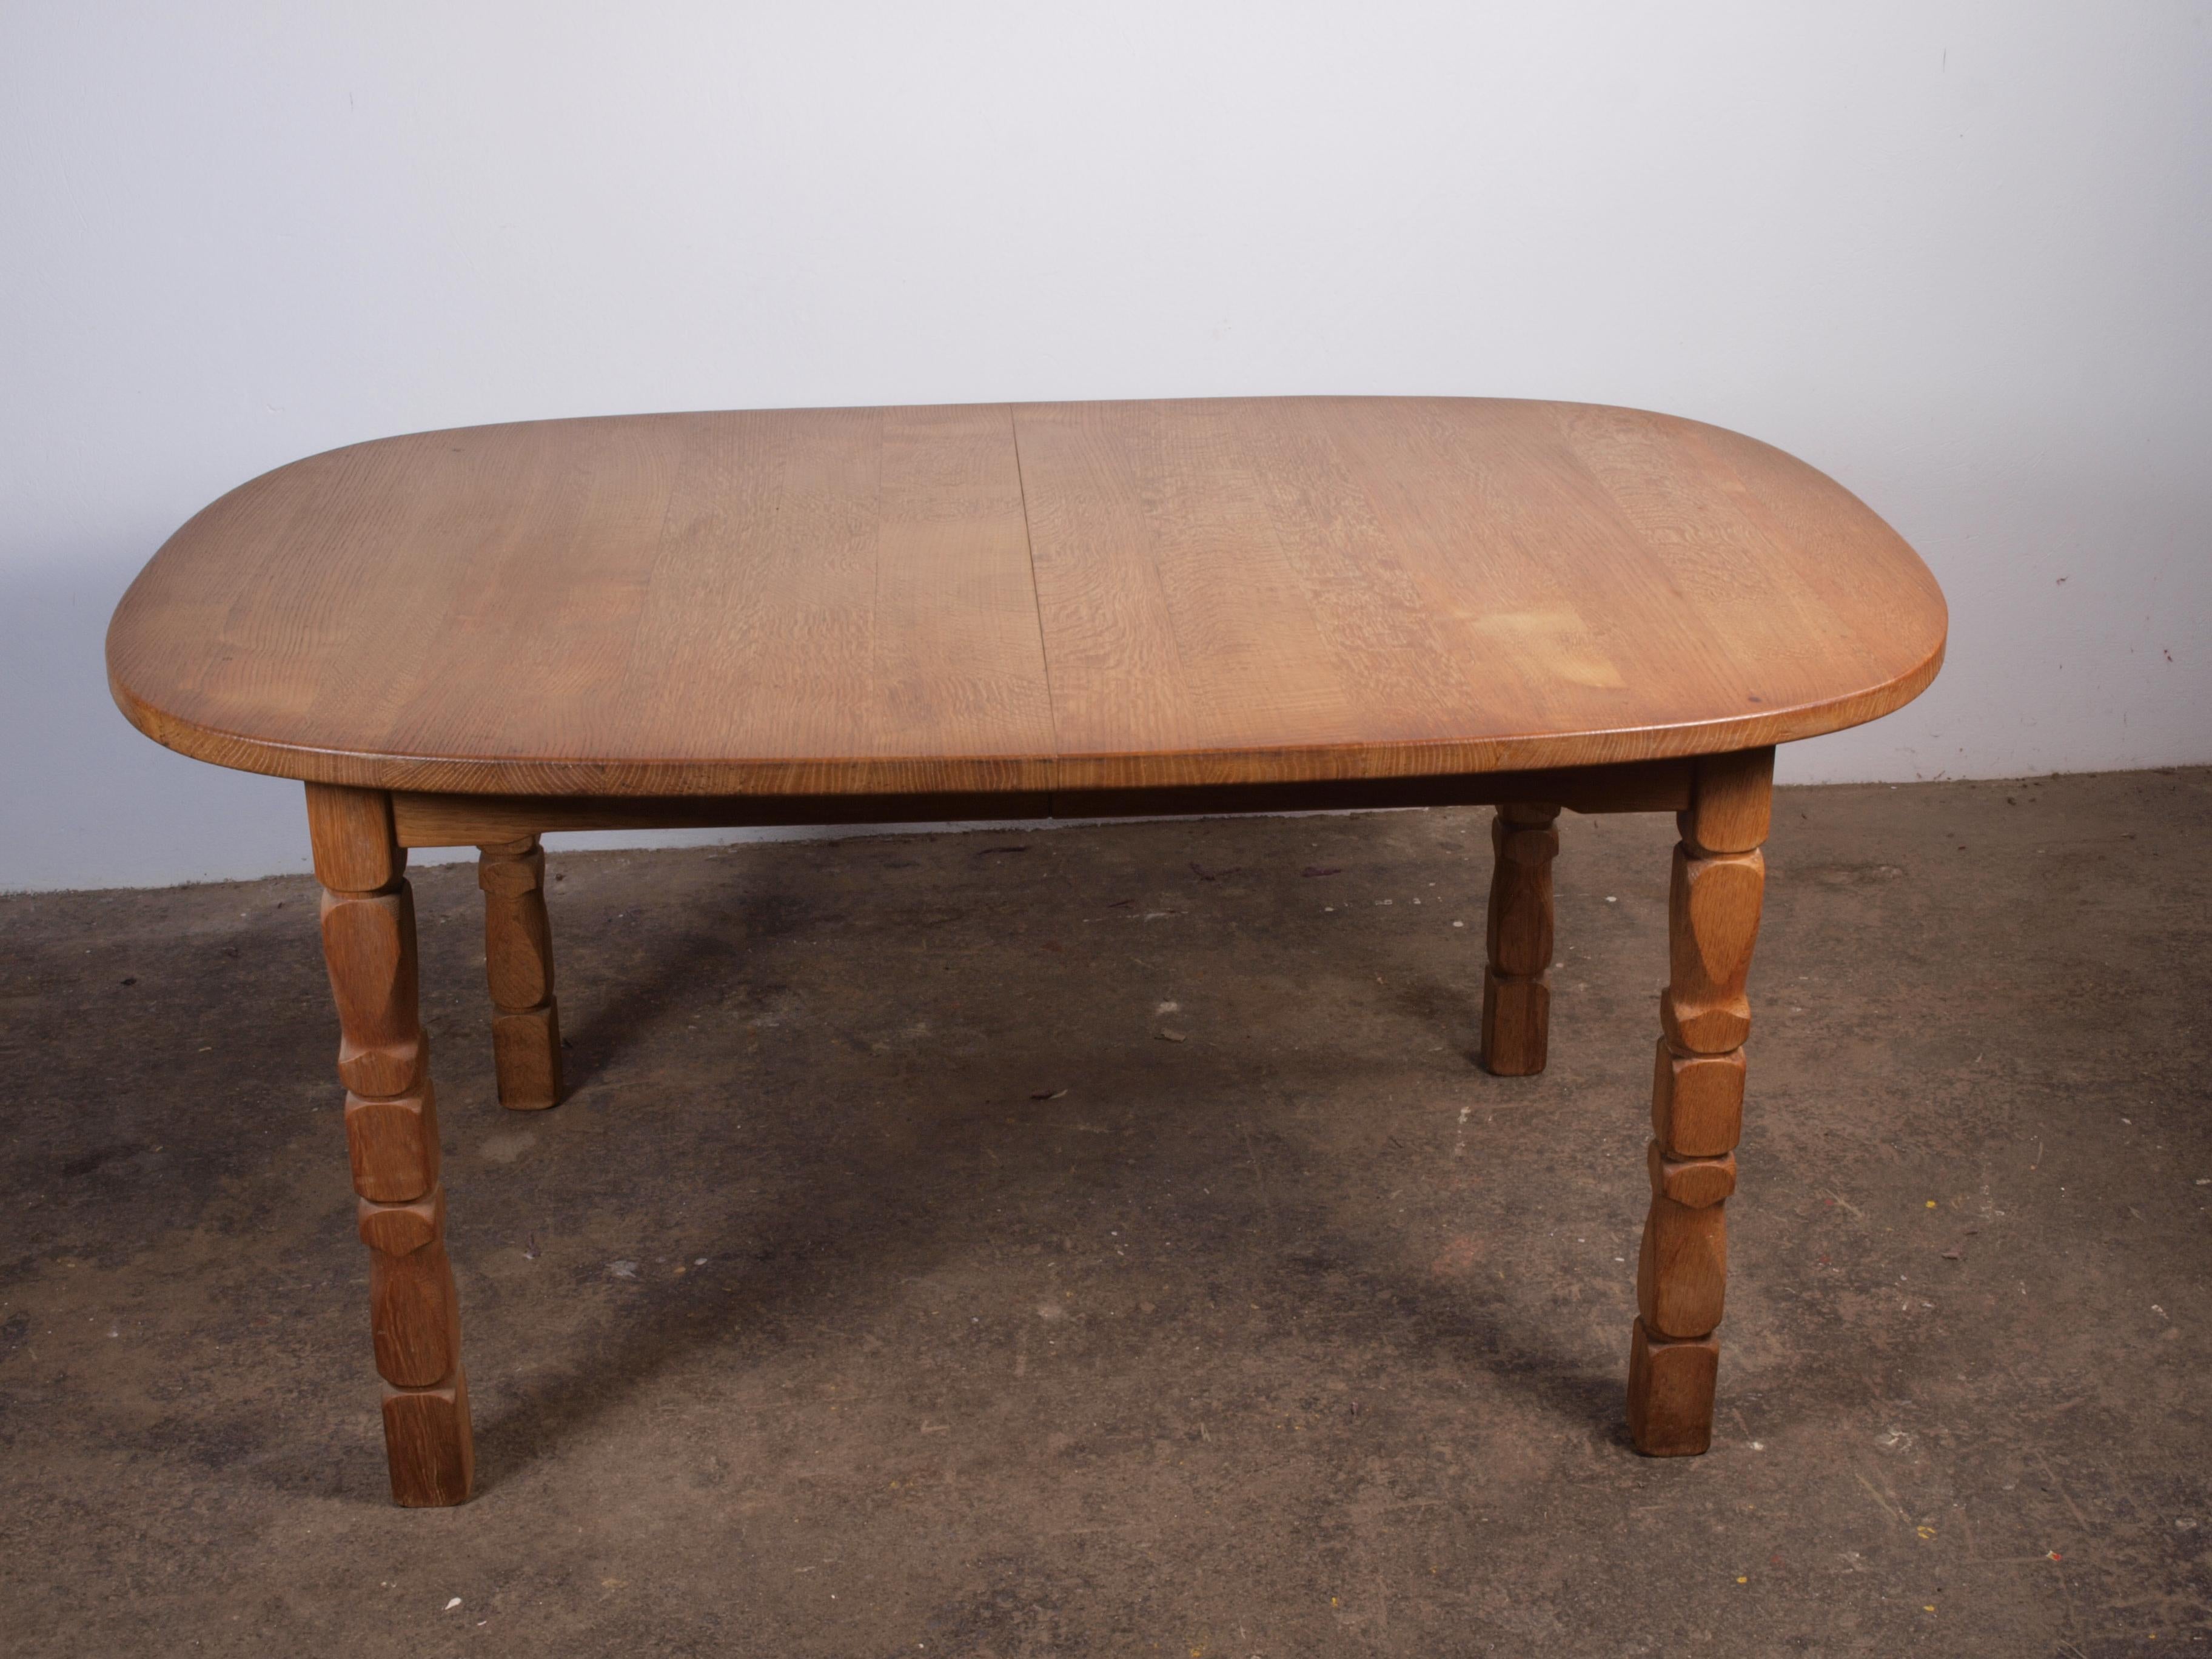 Vintage Design

This vintage oak table shares the essence of Kjaernulf's furniture design. Its brutalist aesthetic, highlighted by intricate leg carvings, is beautifully balanced by its rounded shape. In excellent vintage condition and gliding